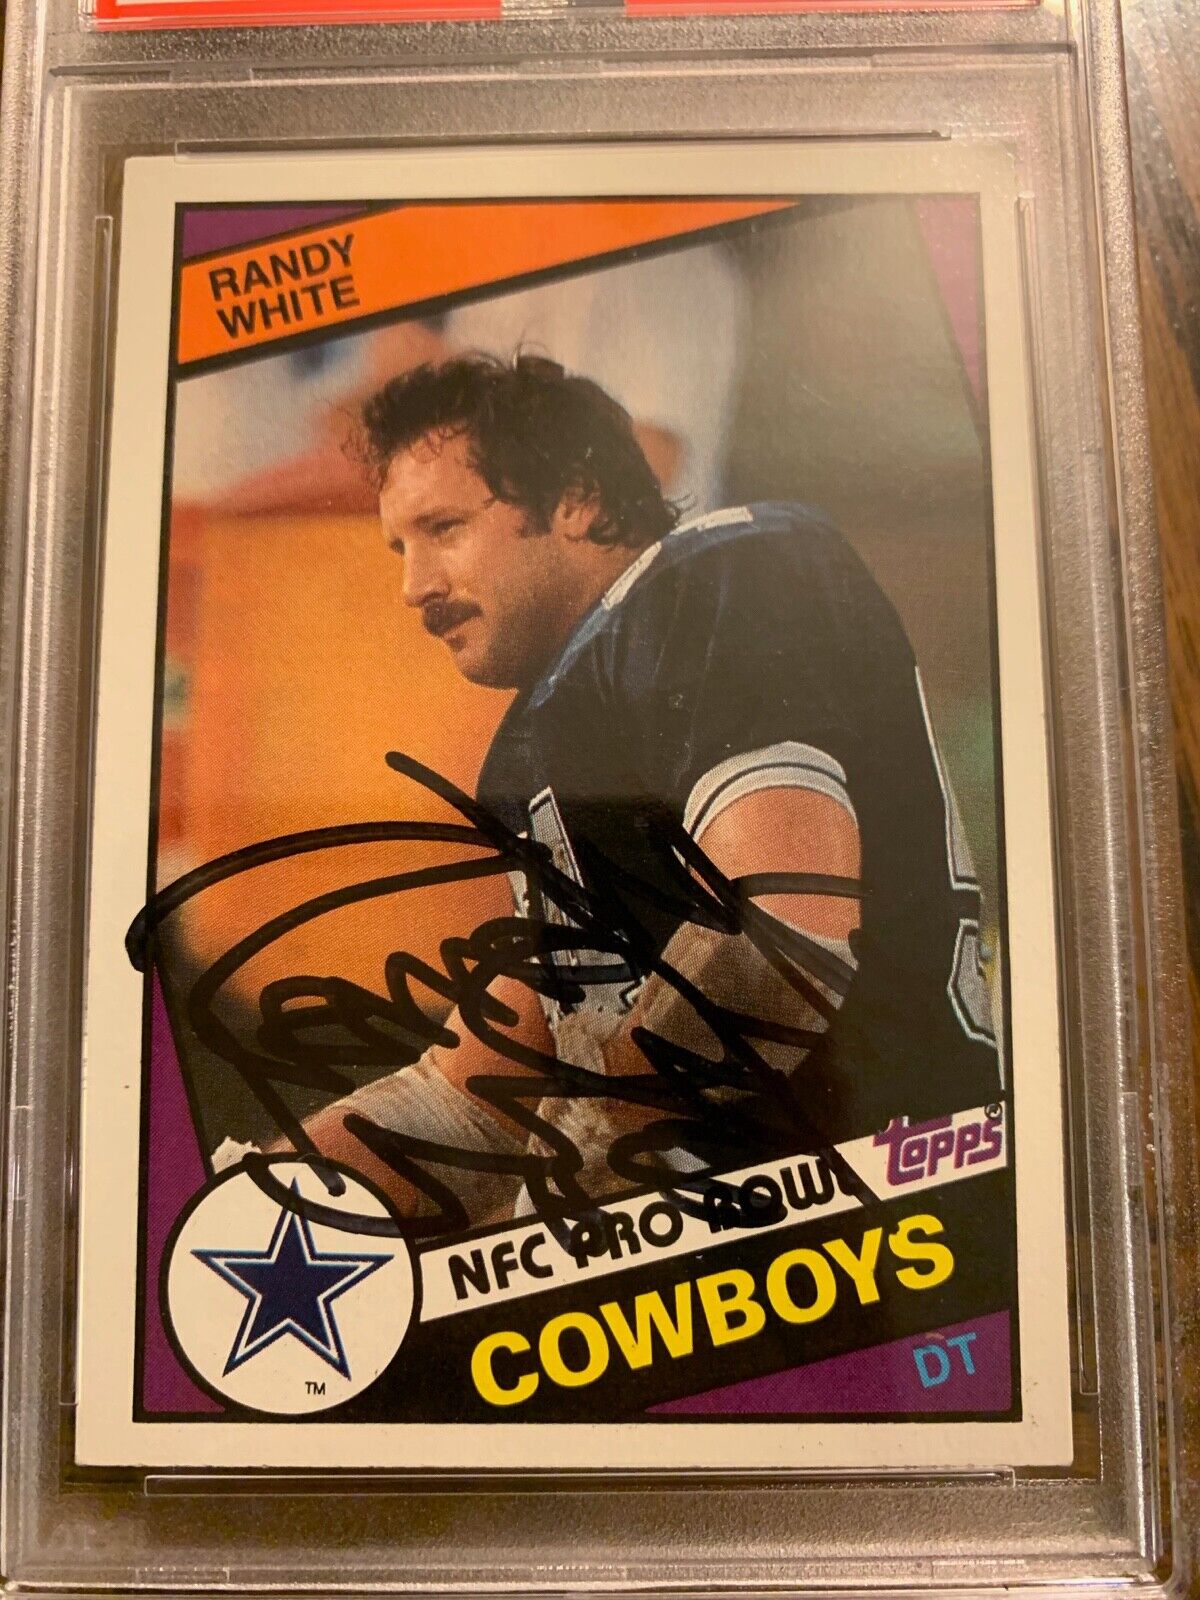 Randy White Autographed 1984 Topps Football Card 249 PSA Slabbed & Certified B